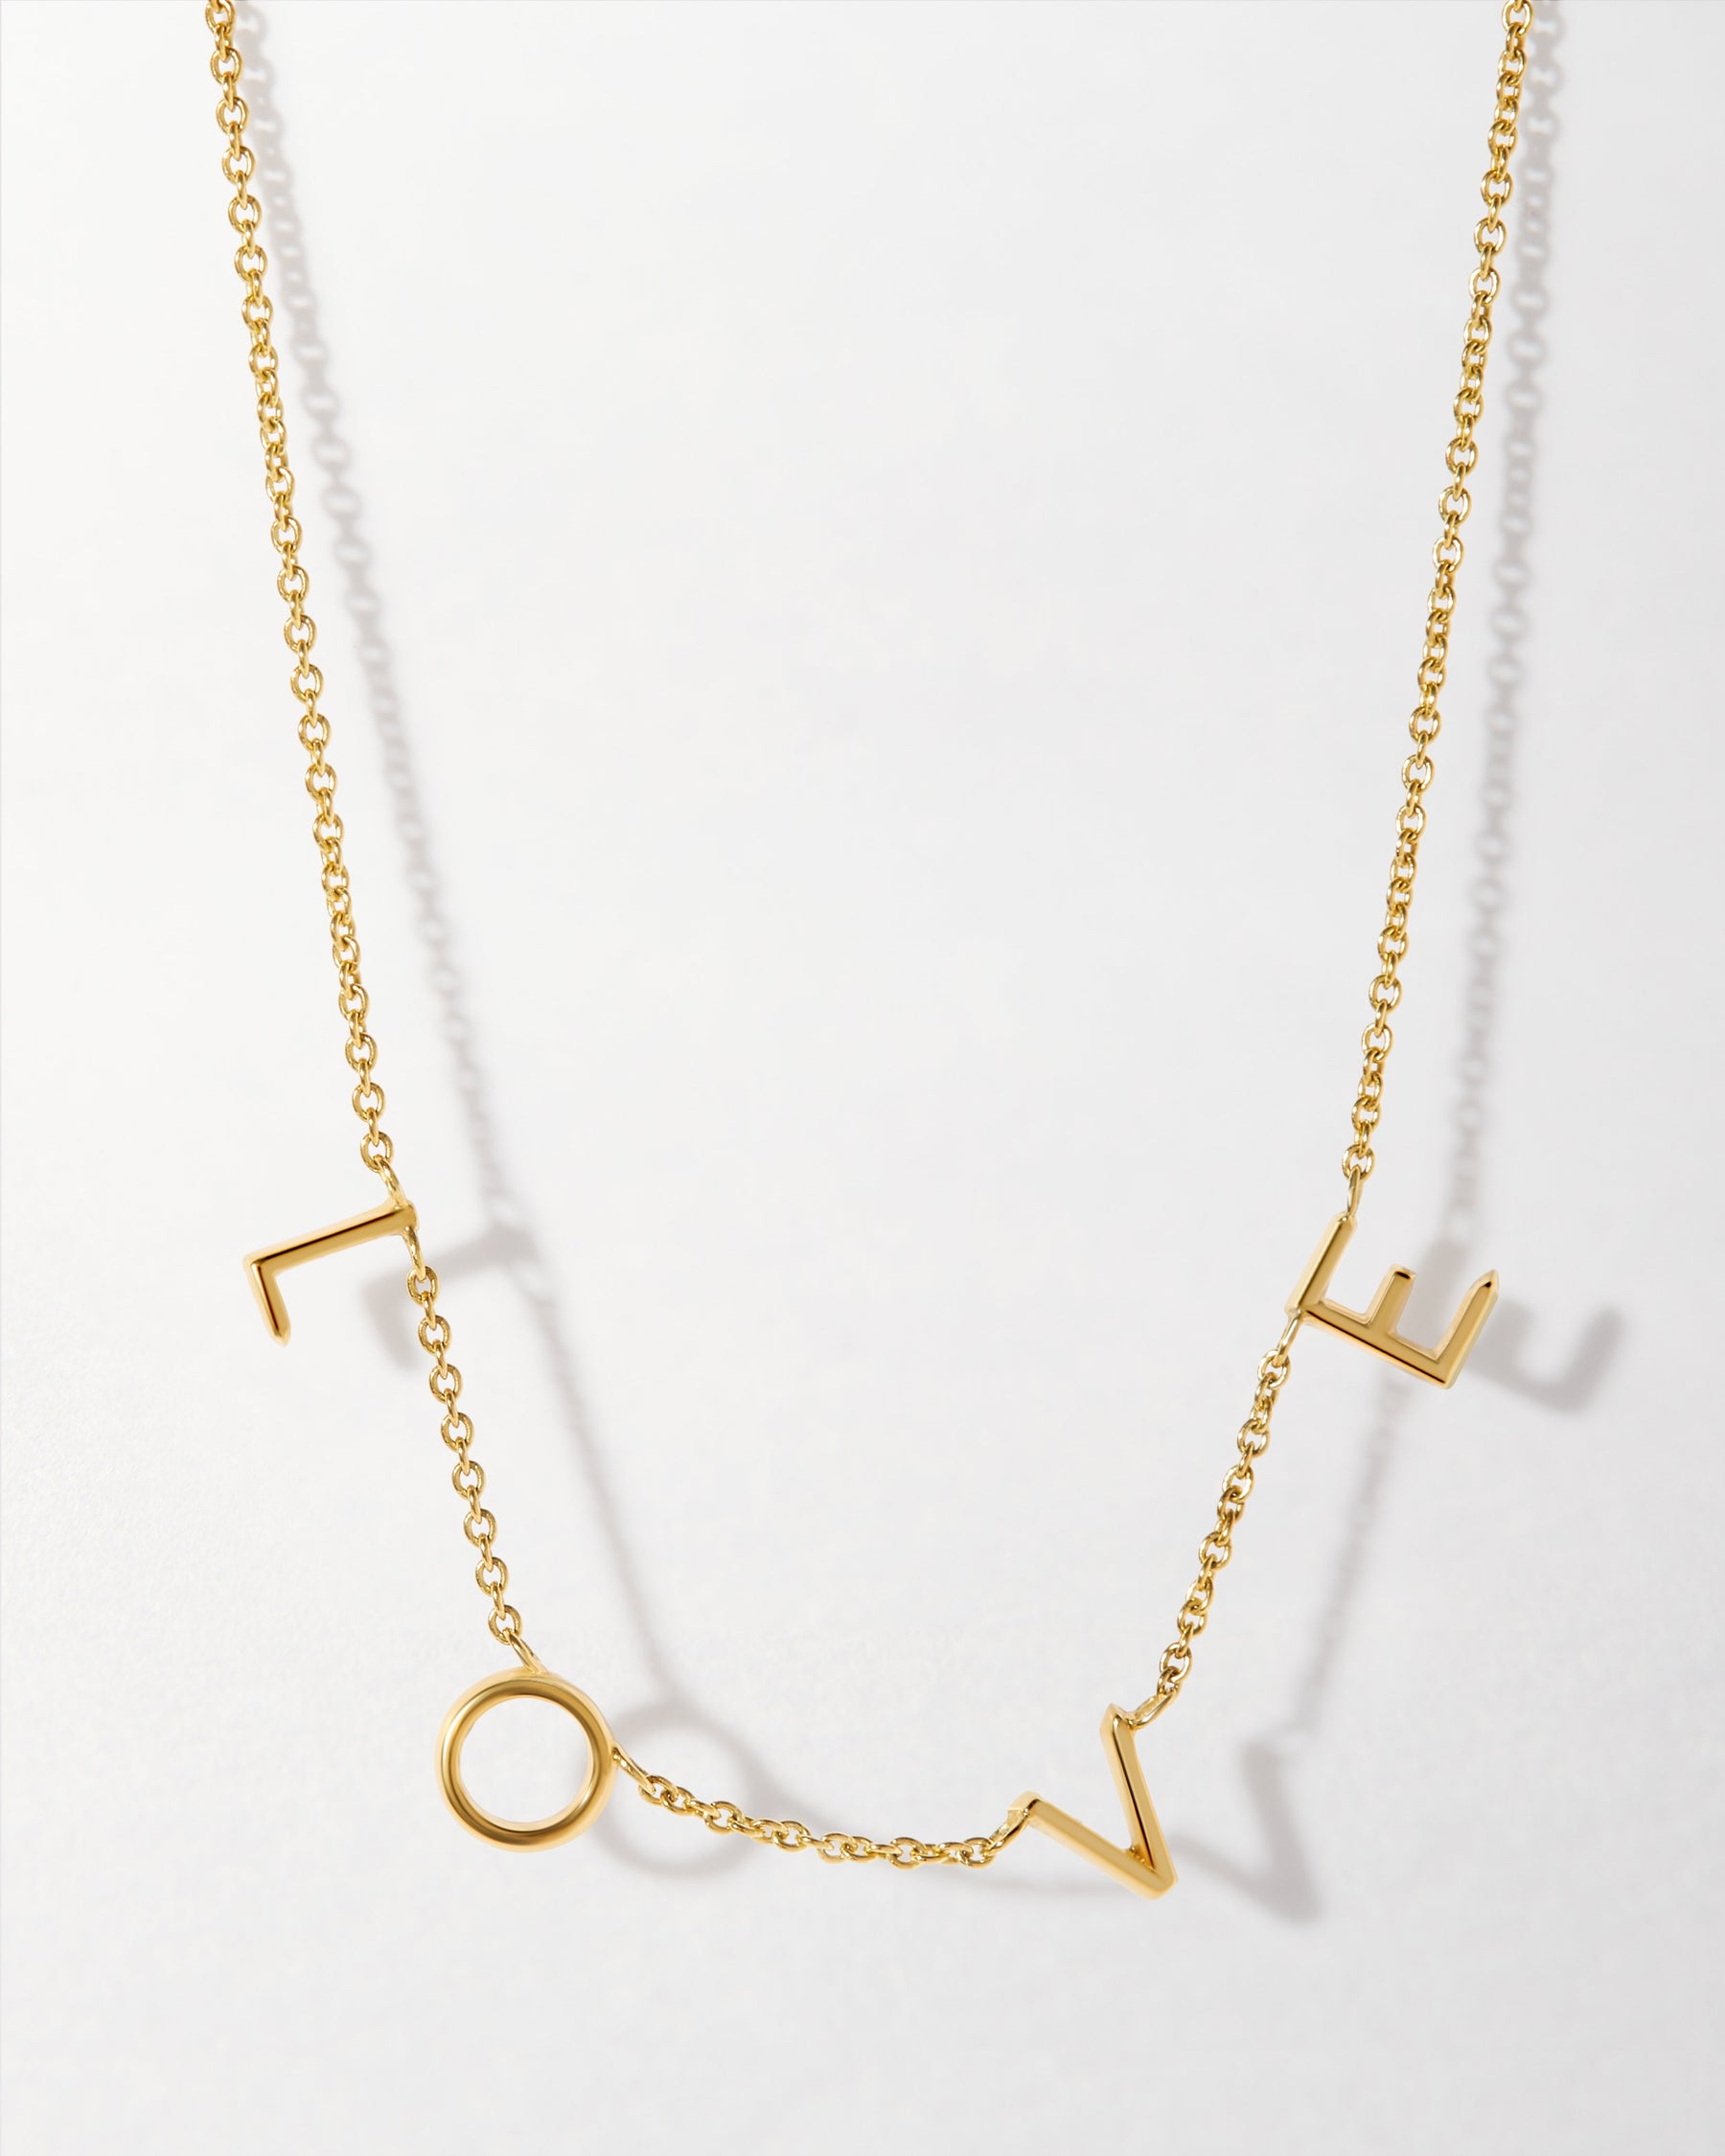 LOVE LETTER NECKLACE – Blink by Mehak